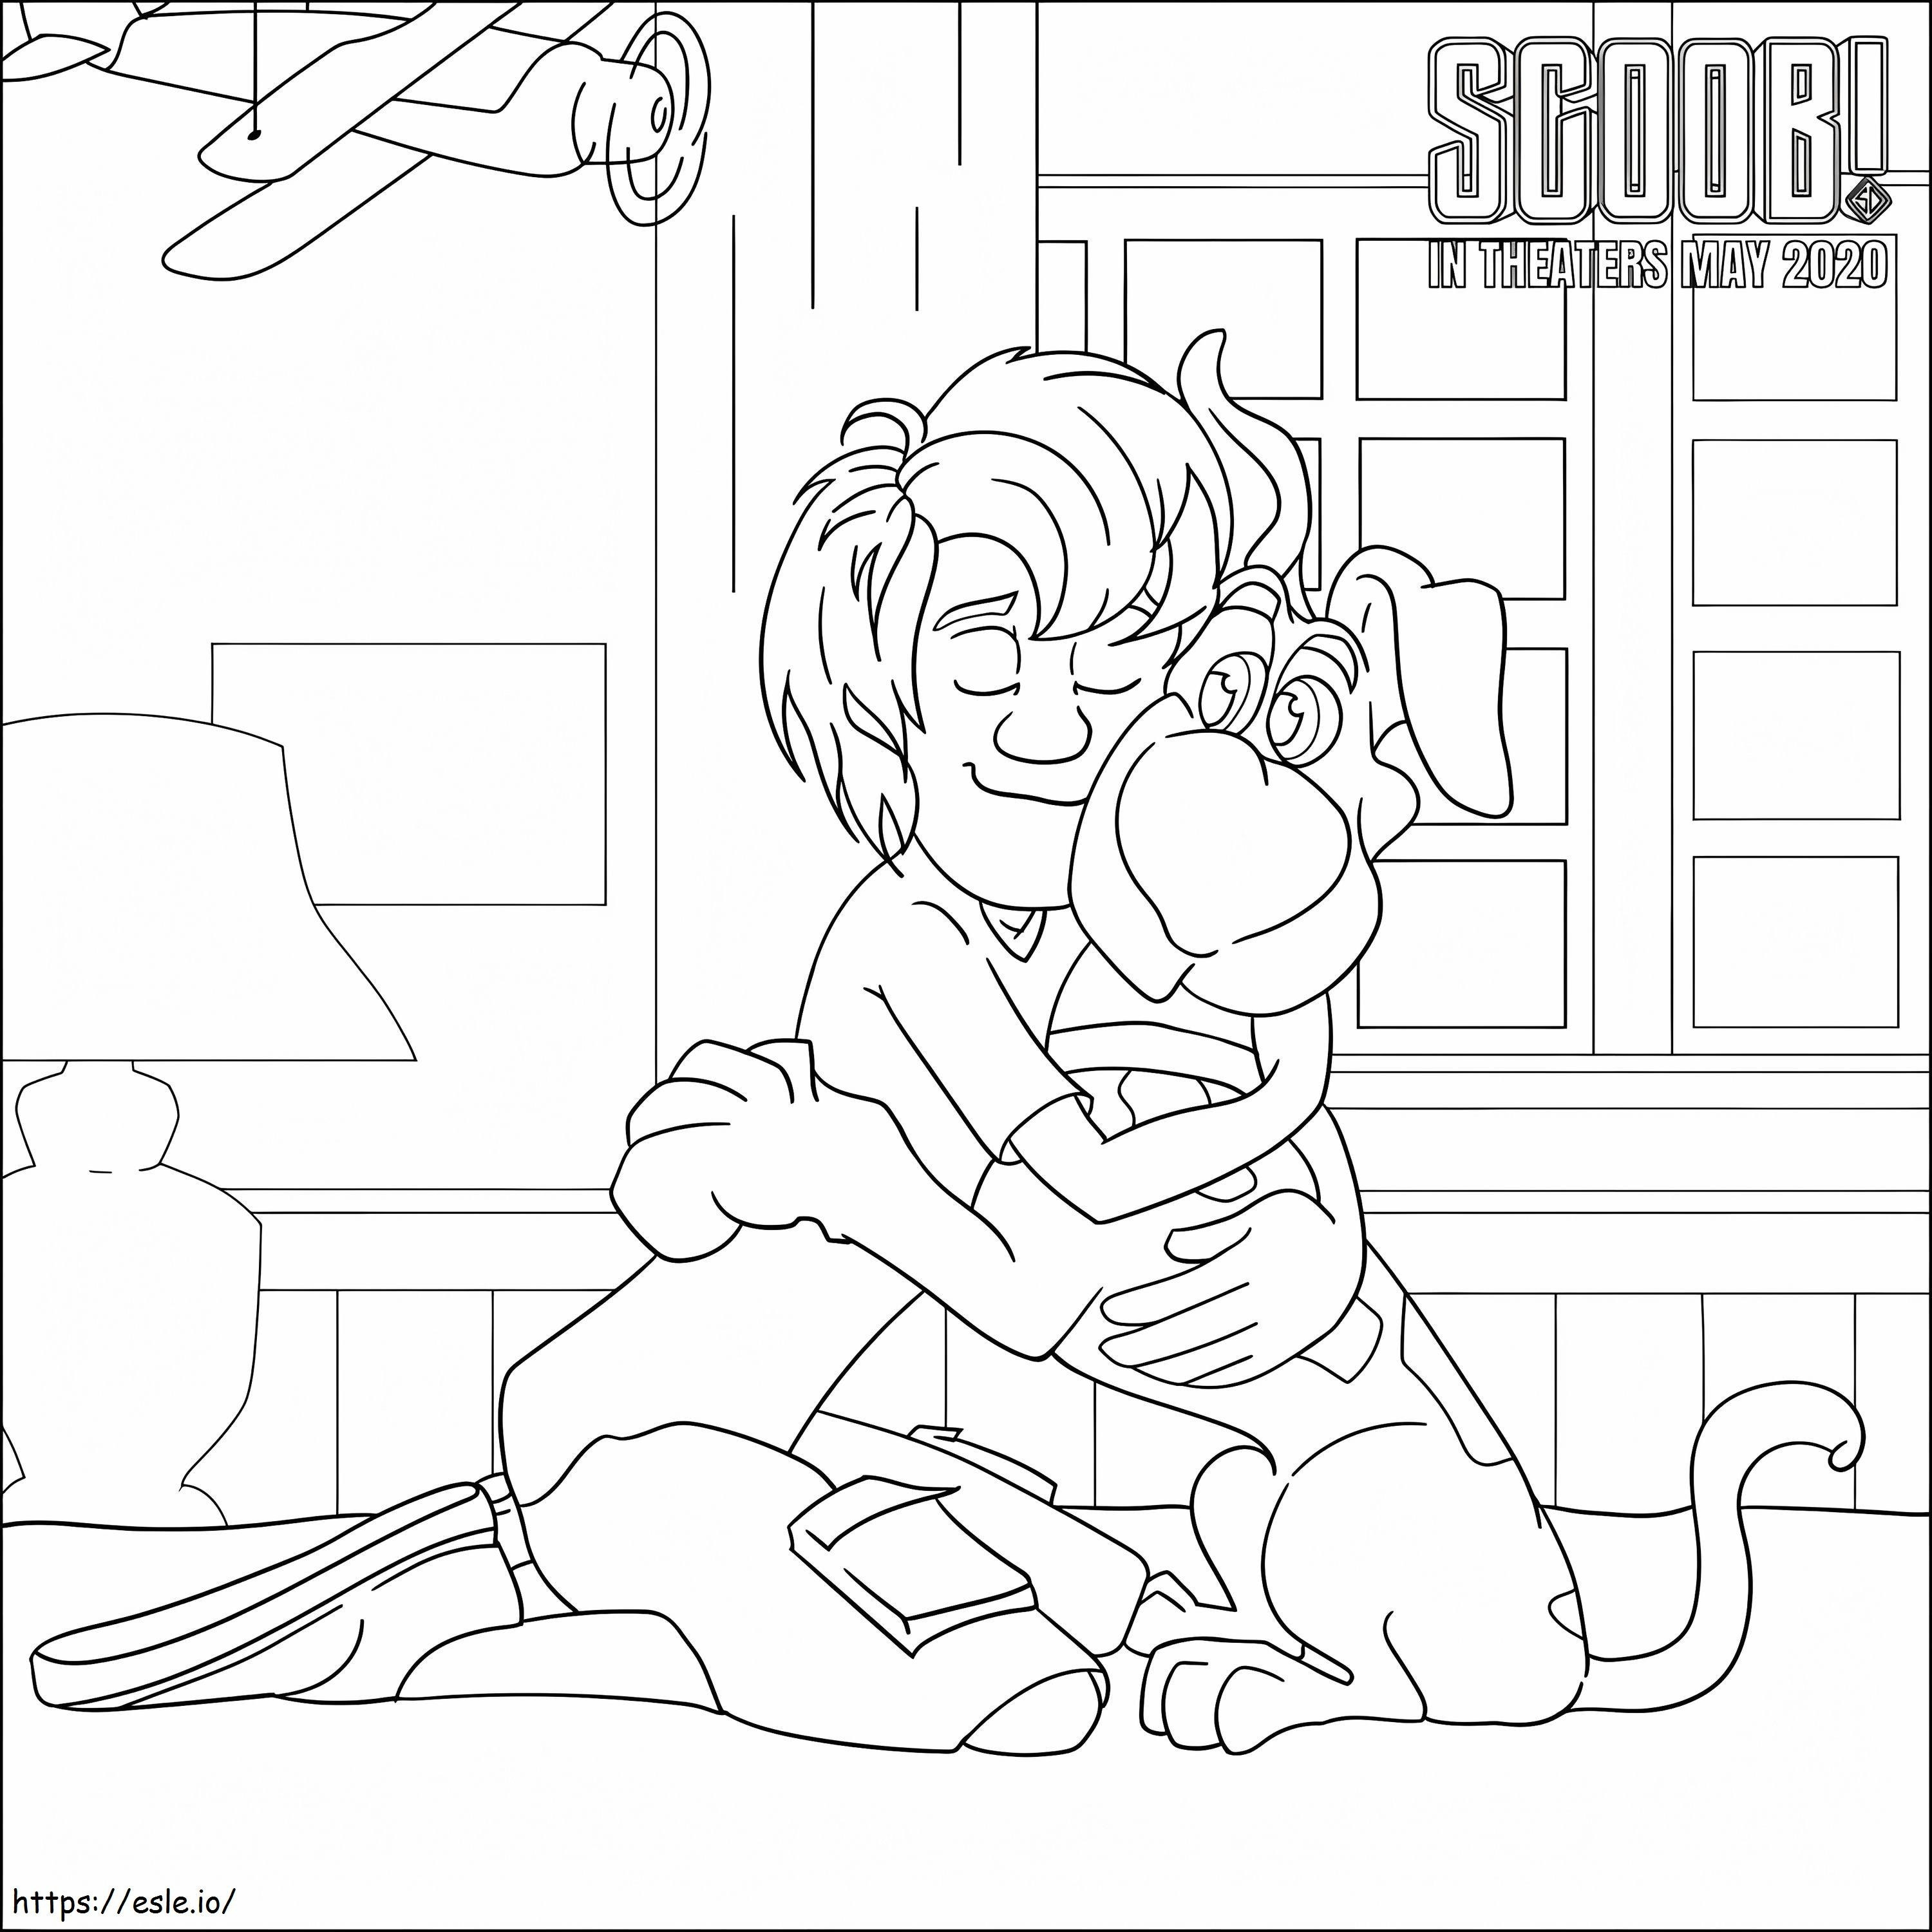 1588991610 12811 112 Bee 4 1024X1024 1 coloring page